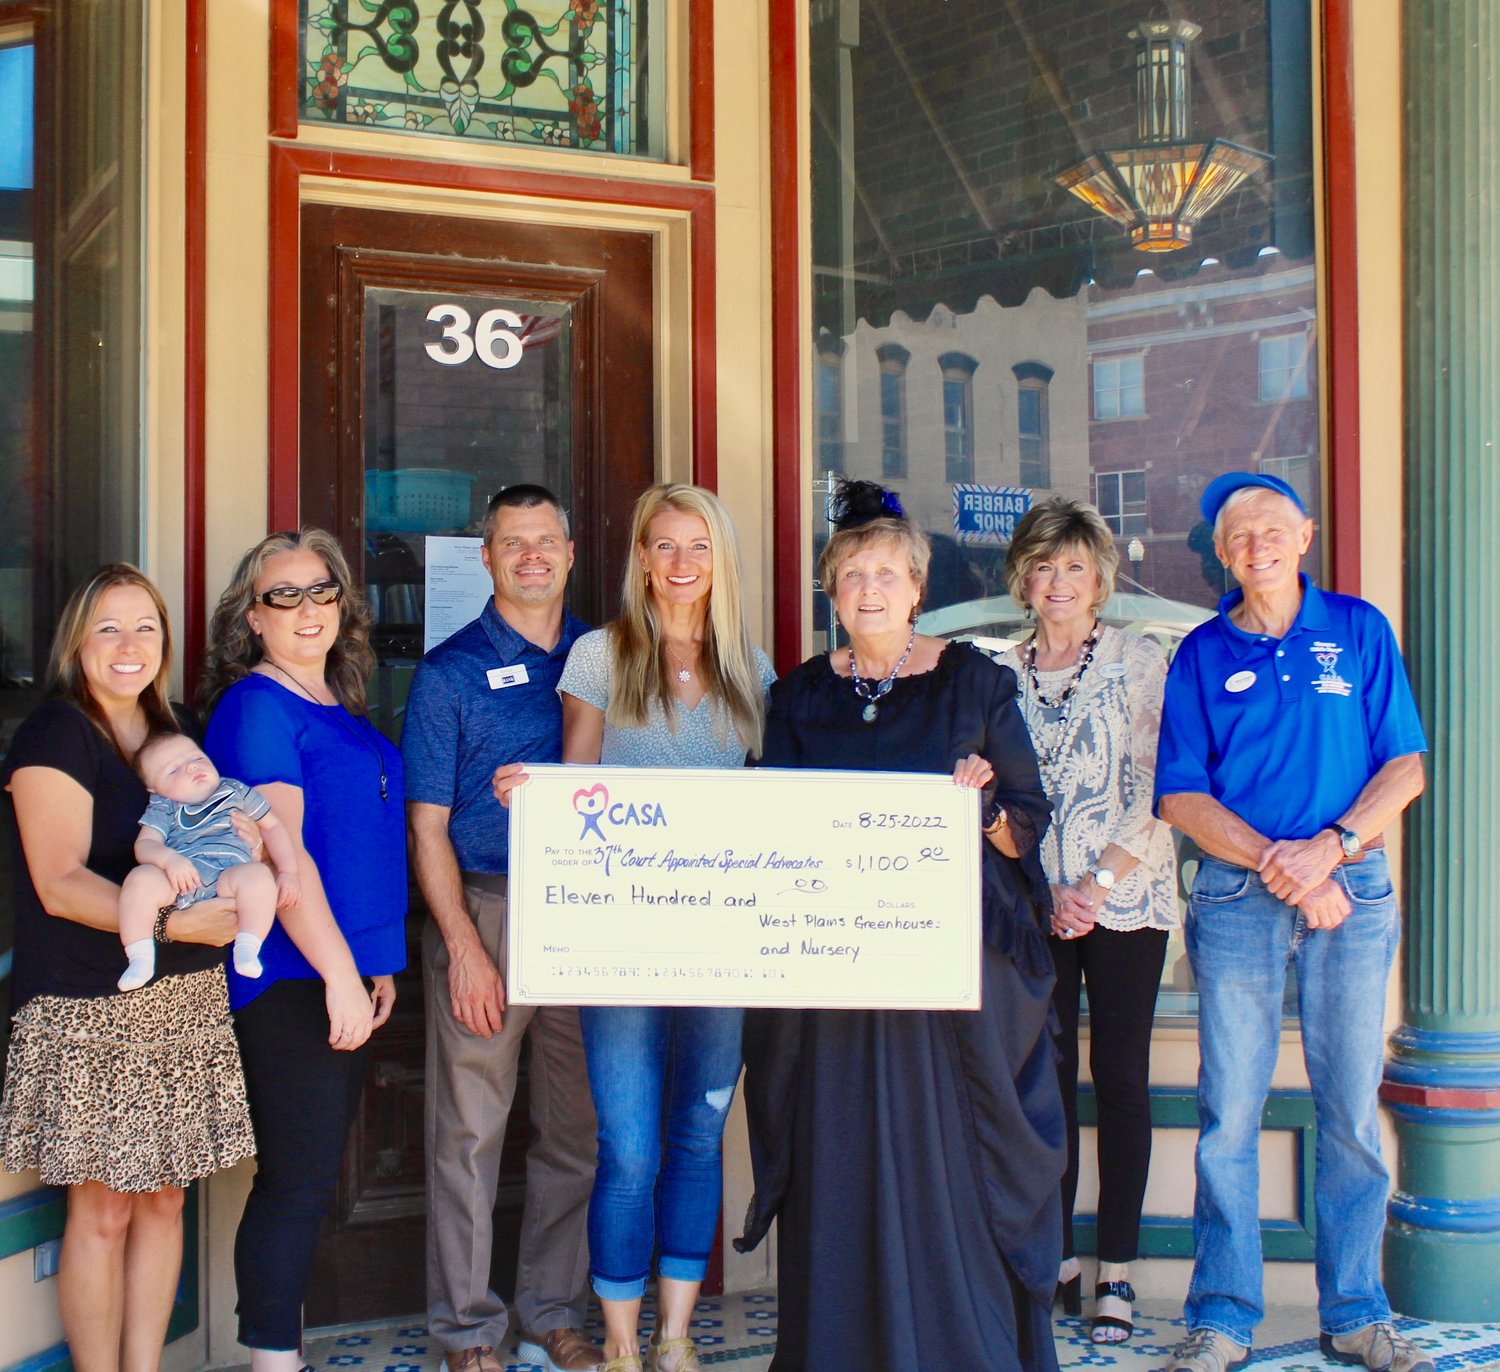 West Plains Greenhouses and Nursery has donated $1,100 to CASA for its fundraising event in September. From left: CASA volunteer Cheryl Murphy with grandson Luke, fundraising committee member Maggie Fielder, West Plains Greenhouse and Nursery owners Nathan and Lisa Cropper, CASA Executive Director Connie Pendergrass and board members Reta Reed and Marty Szigety.